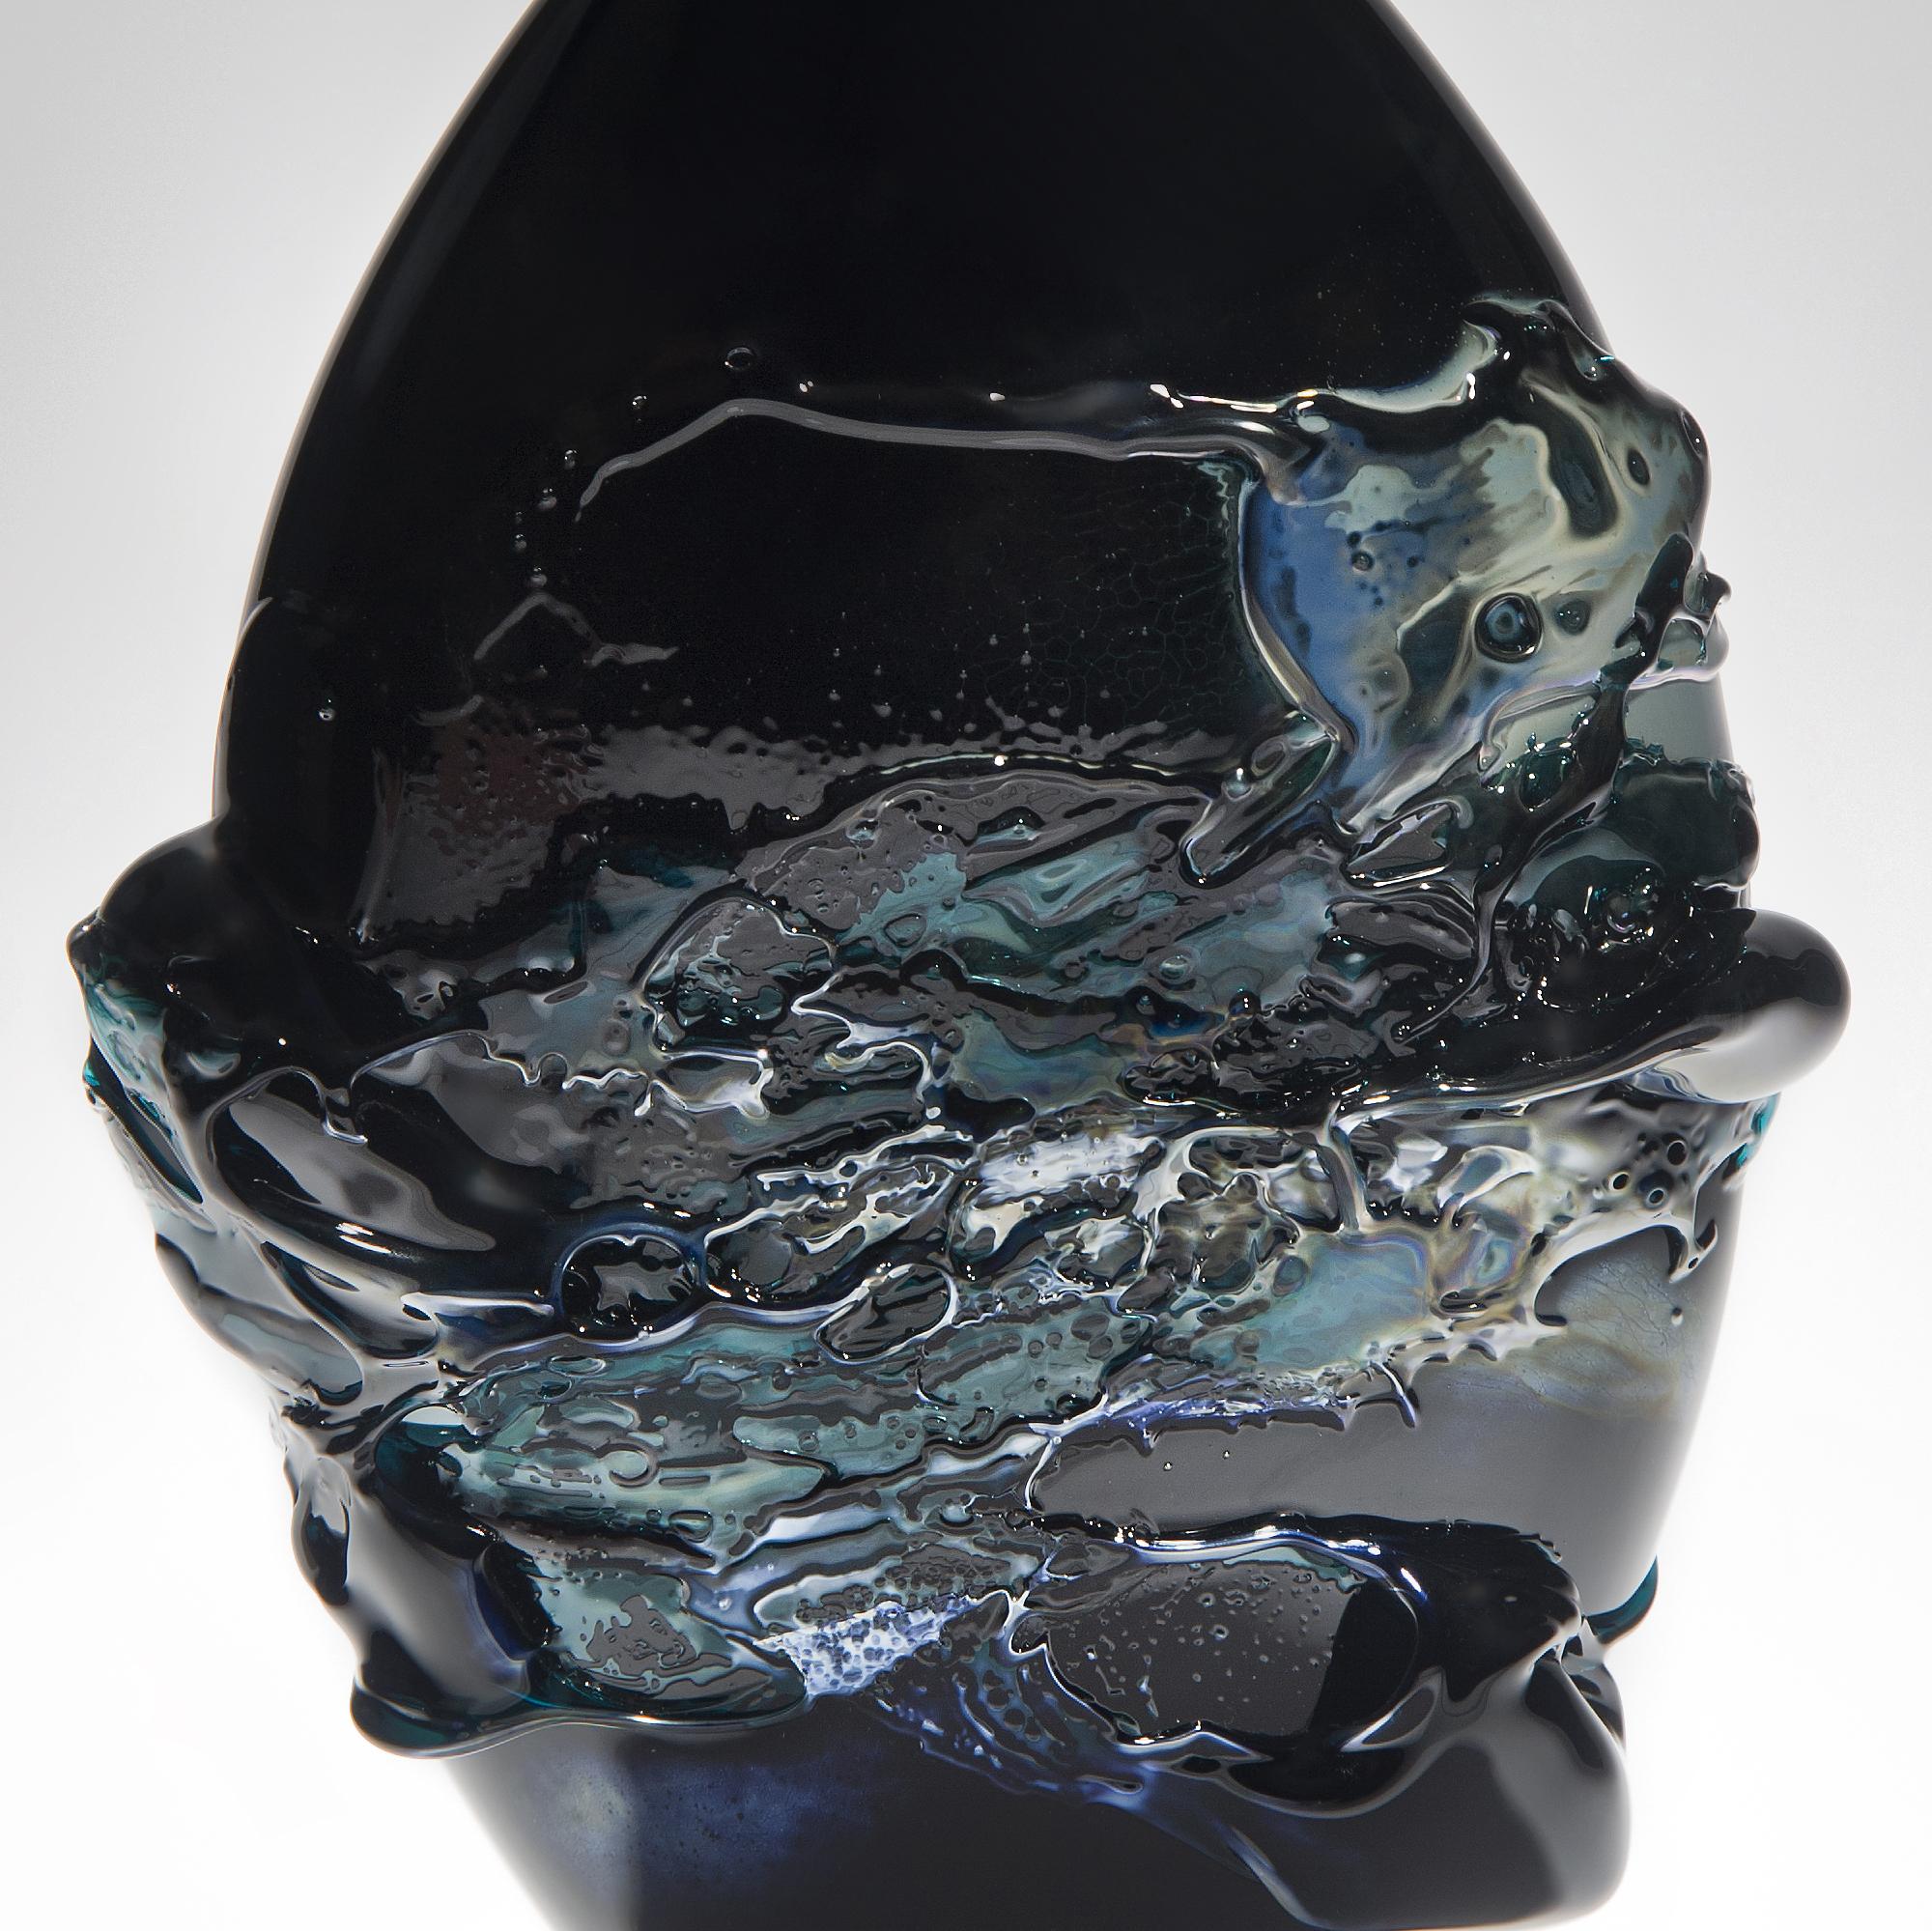 Hand-Crafted Black Sea, a Unique Black, Blue and Metallic Sheen Glass Vase by Bethany Wood